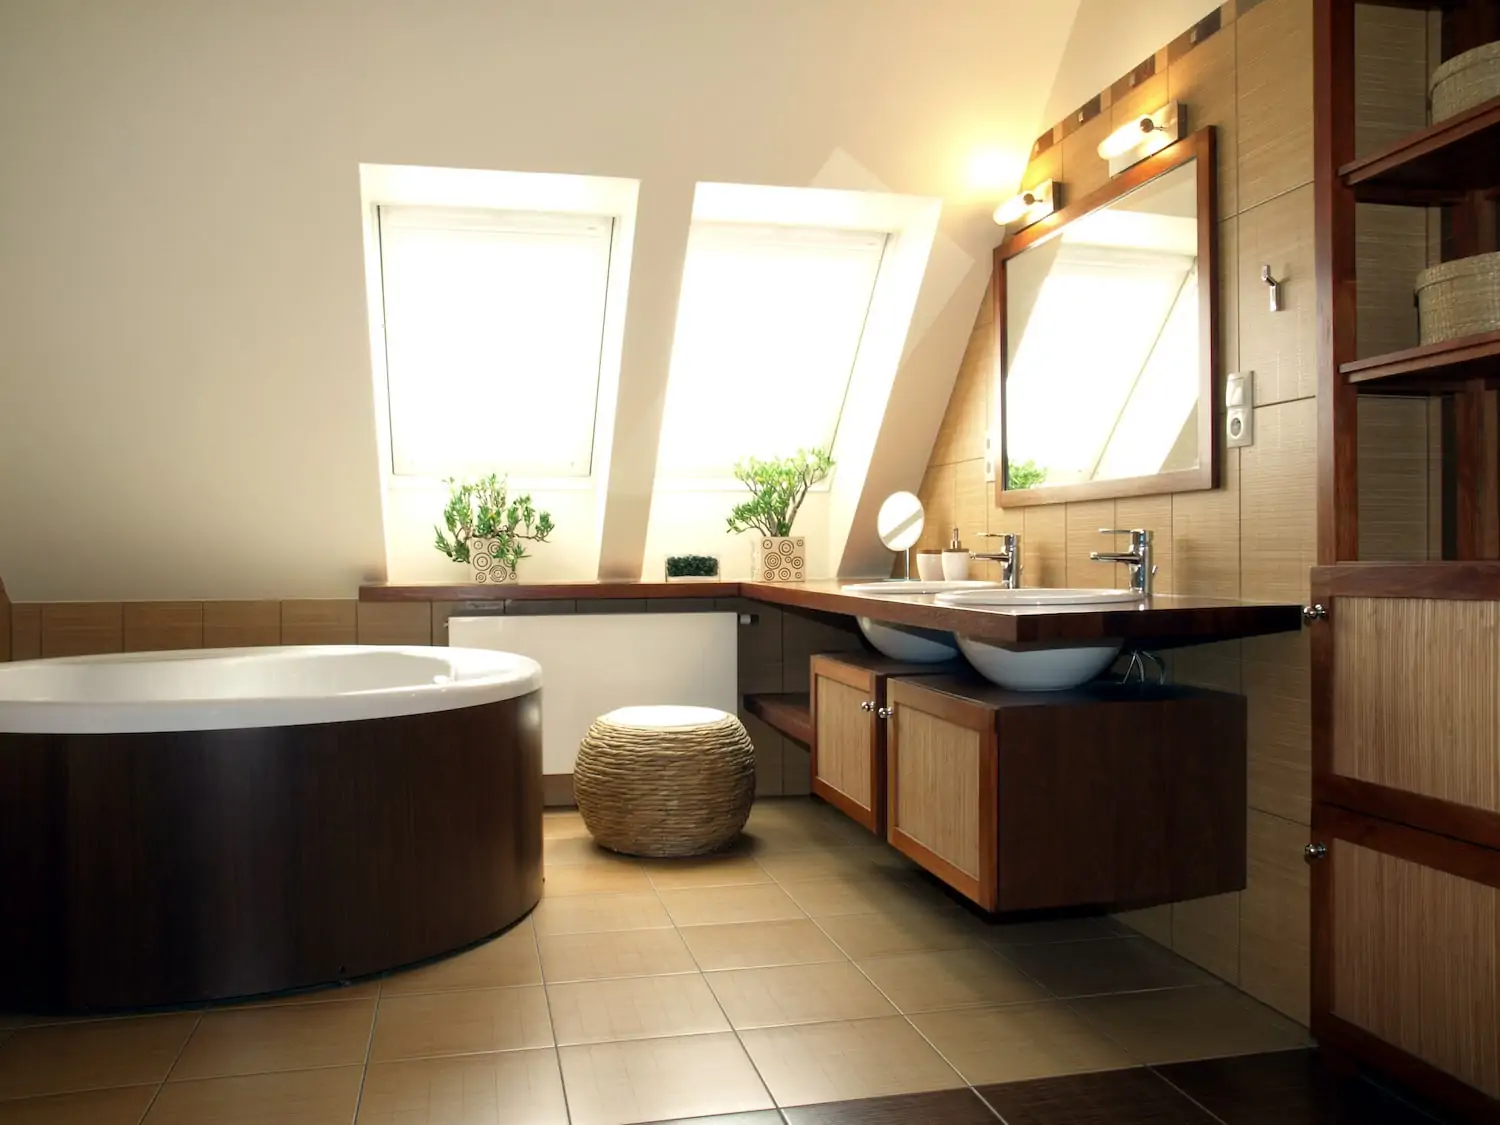 The Ultimate Guide to Types of Bathroom Sinks